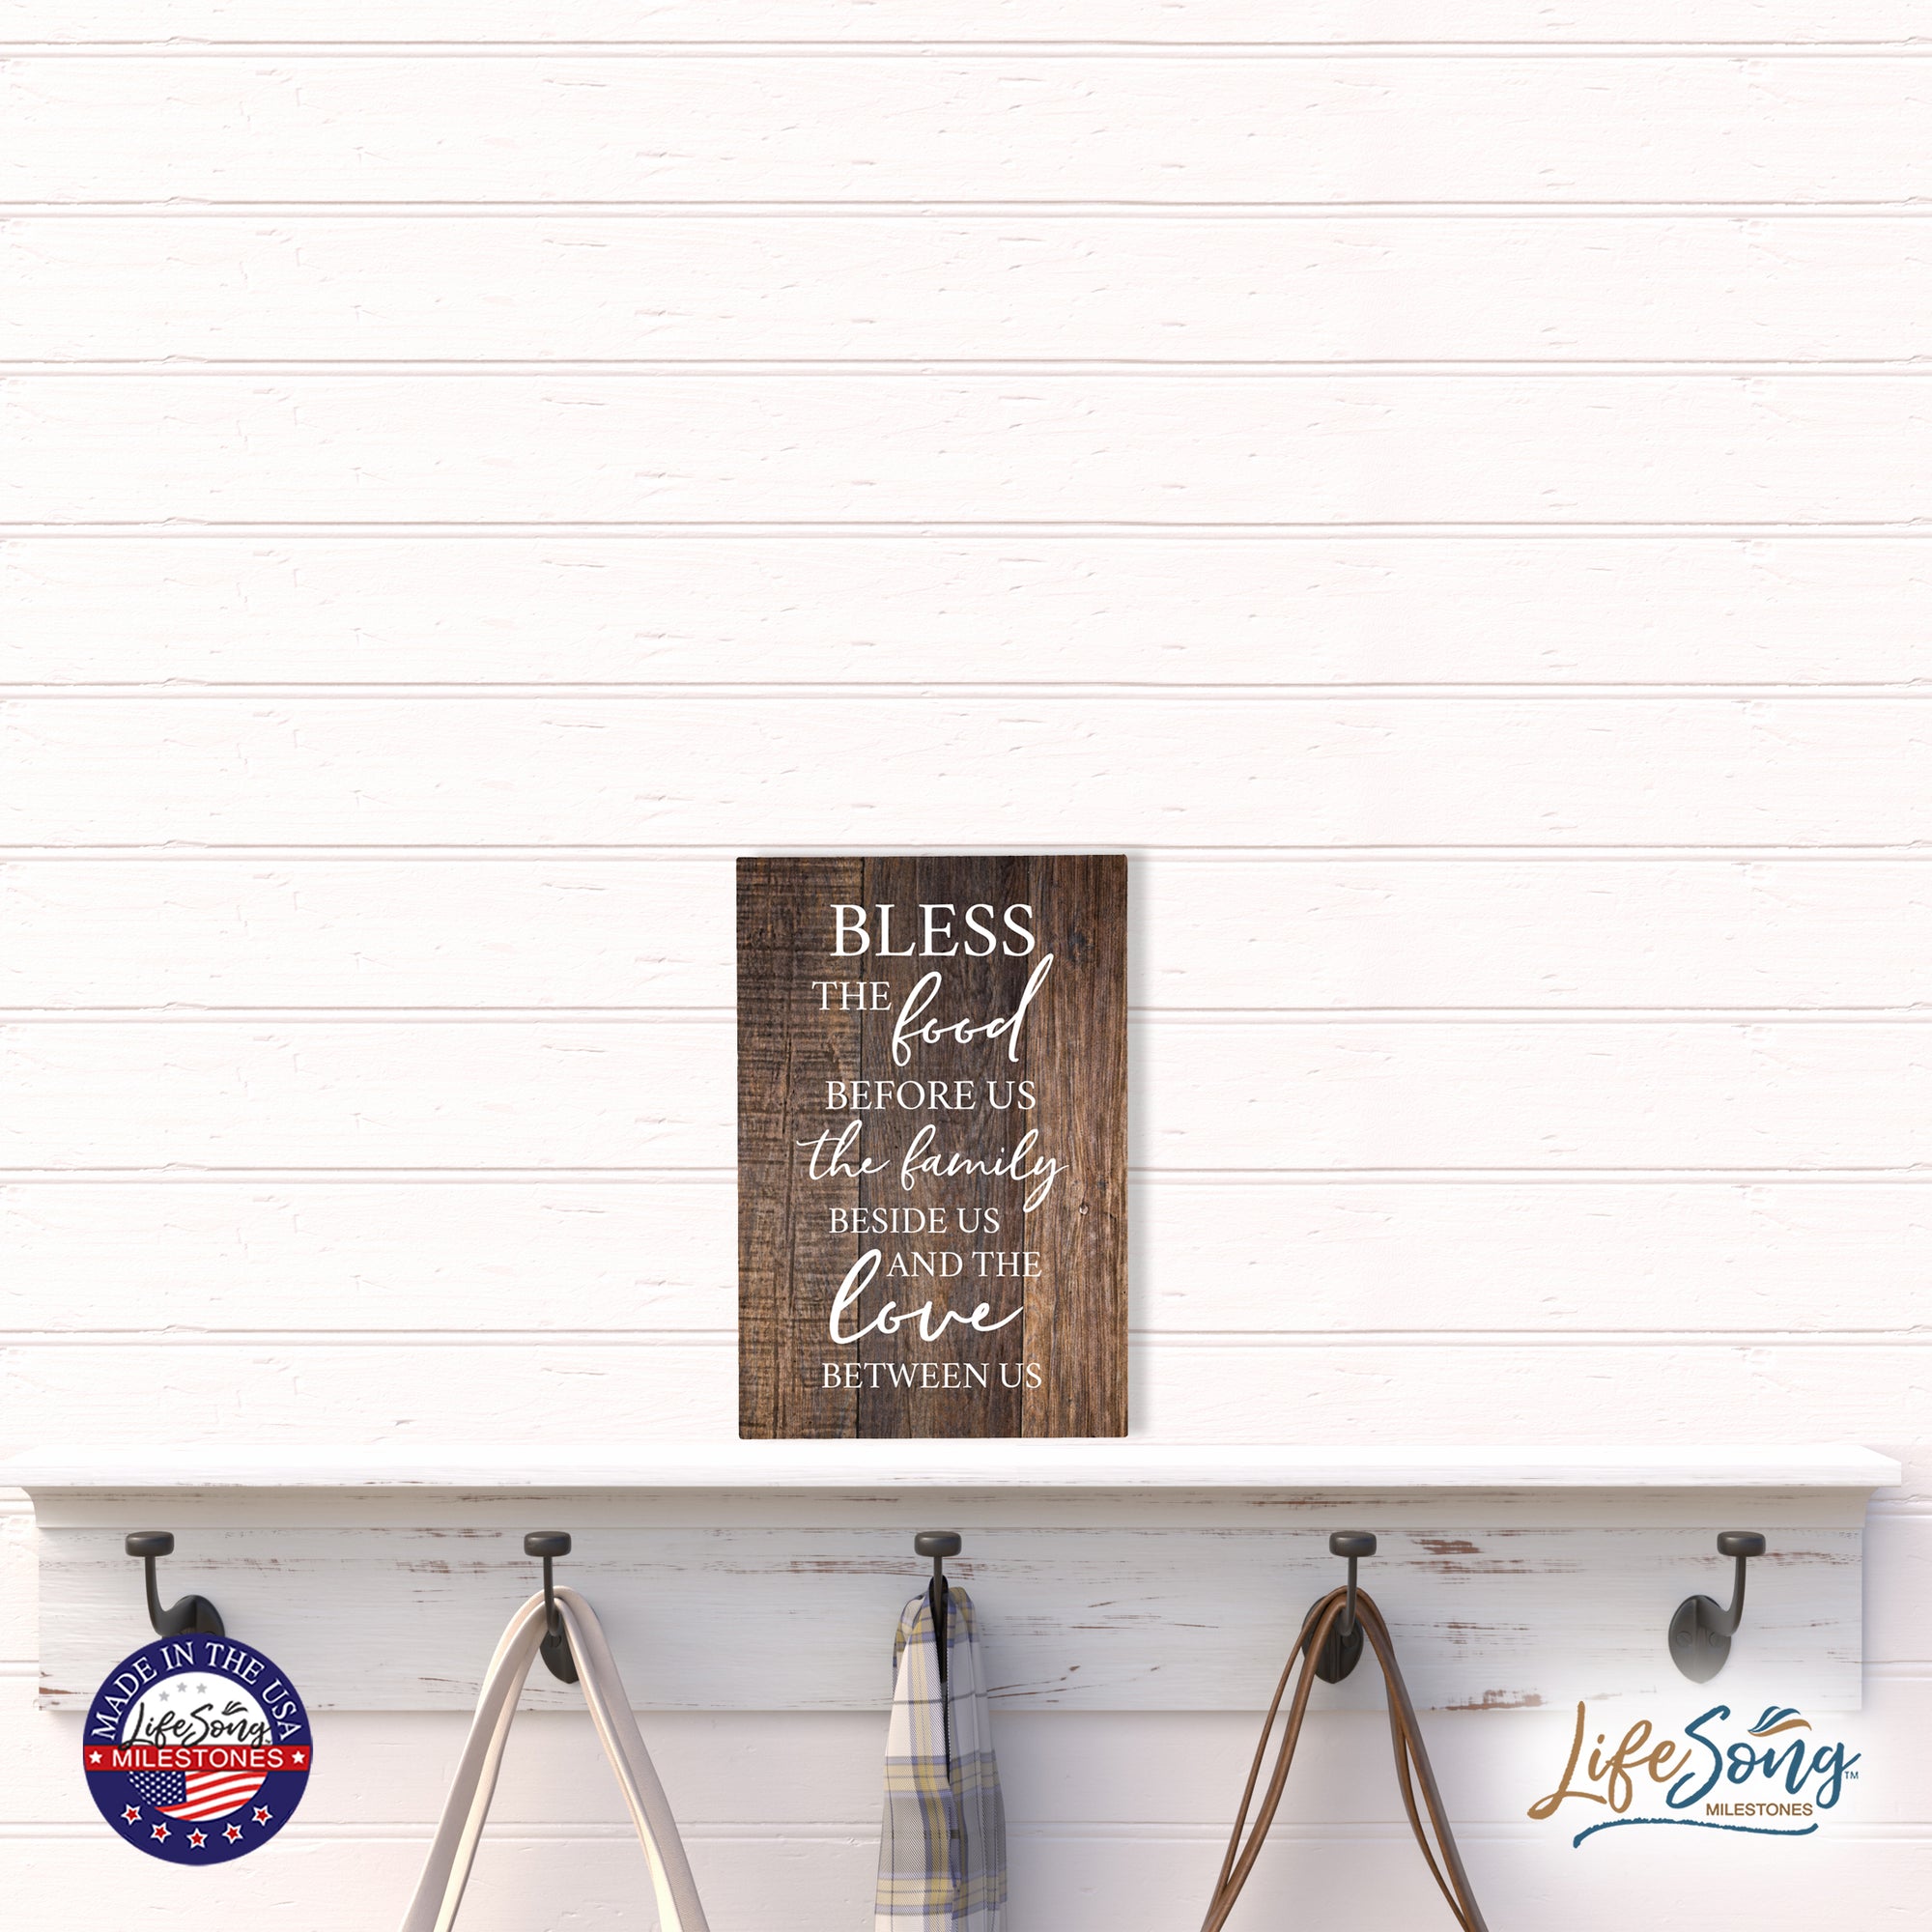 Wood Wall Sign with Inspirational Bible Verse The Food Before Us (The Family) Table Top Home Office Desk Decoration 5.5x8in